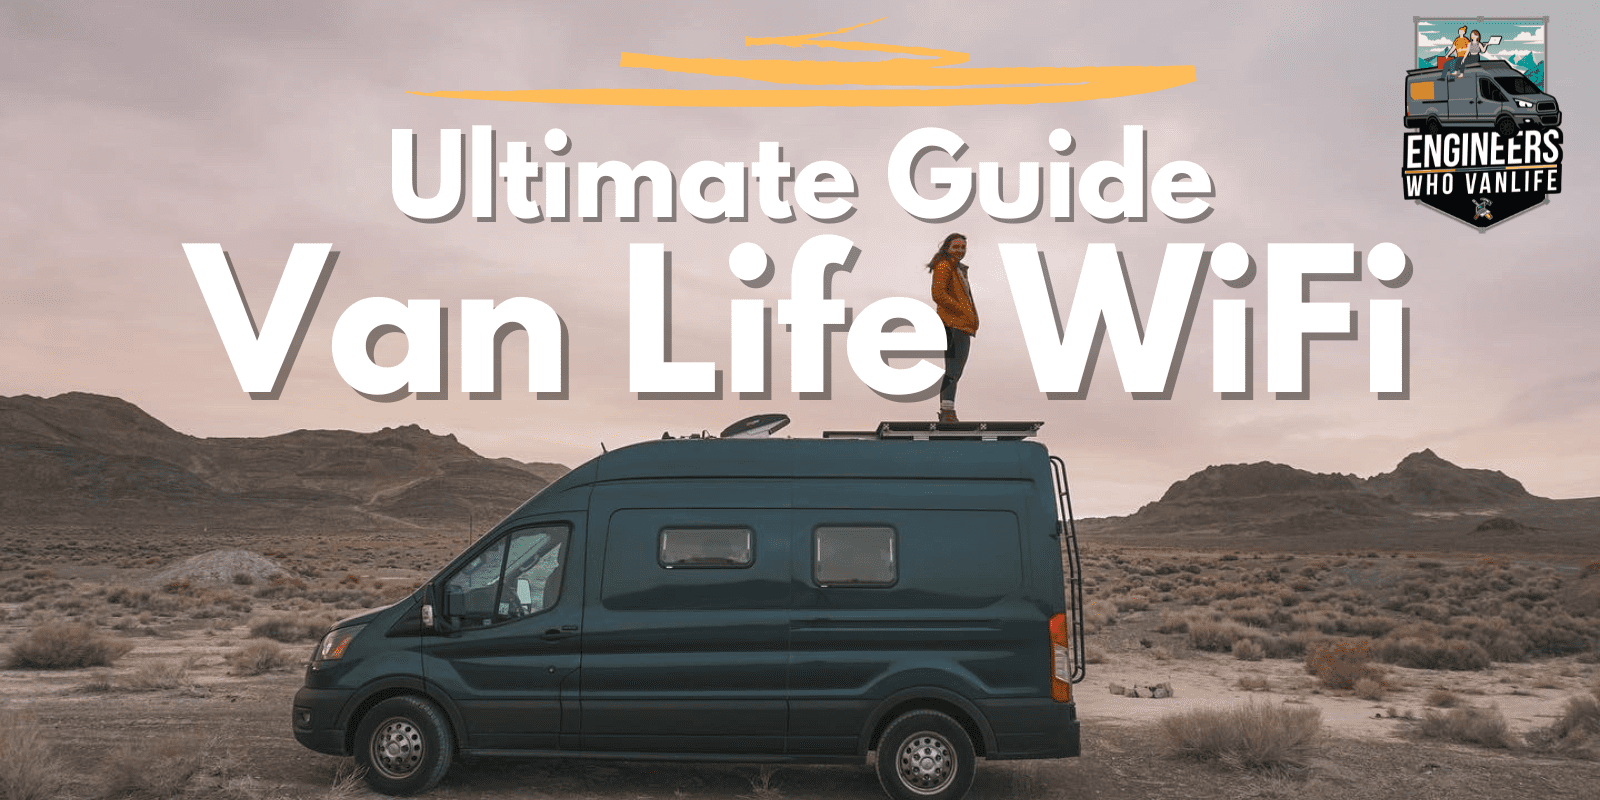 Van Life 101: How-To Guide for Living in a Van – Bearfoot Theory